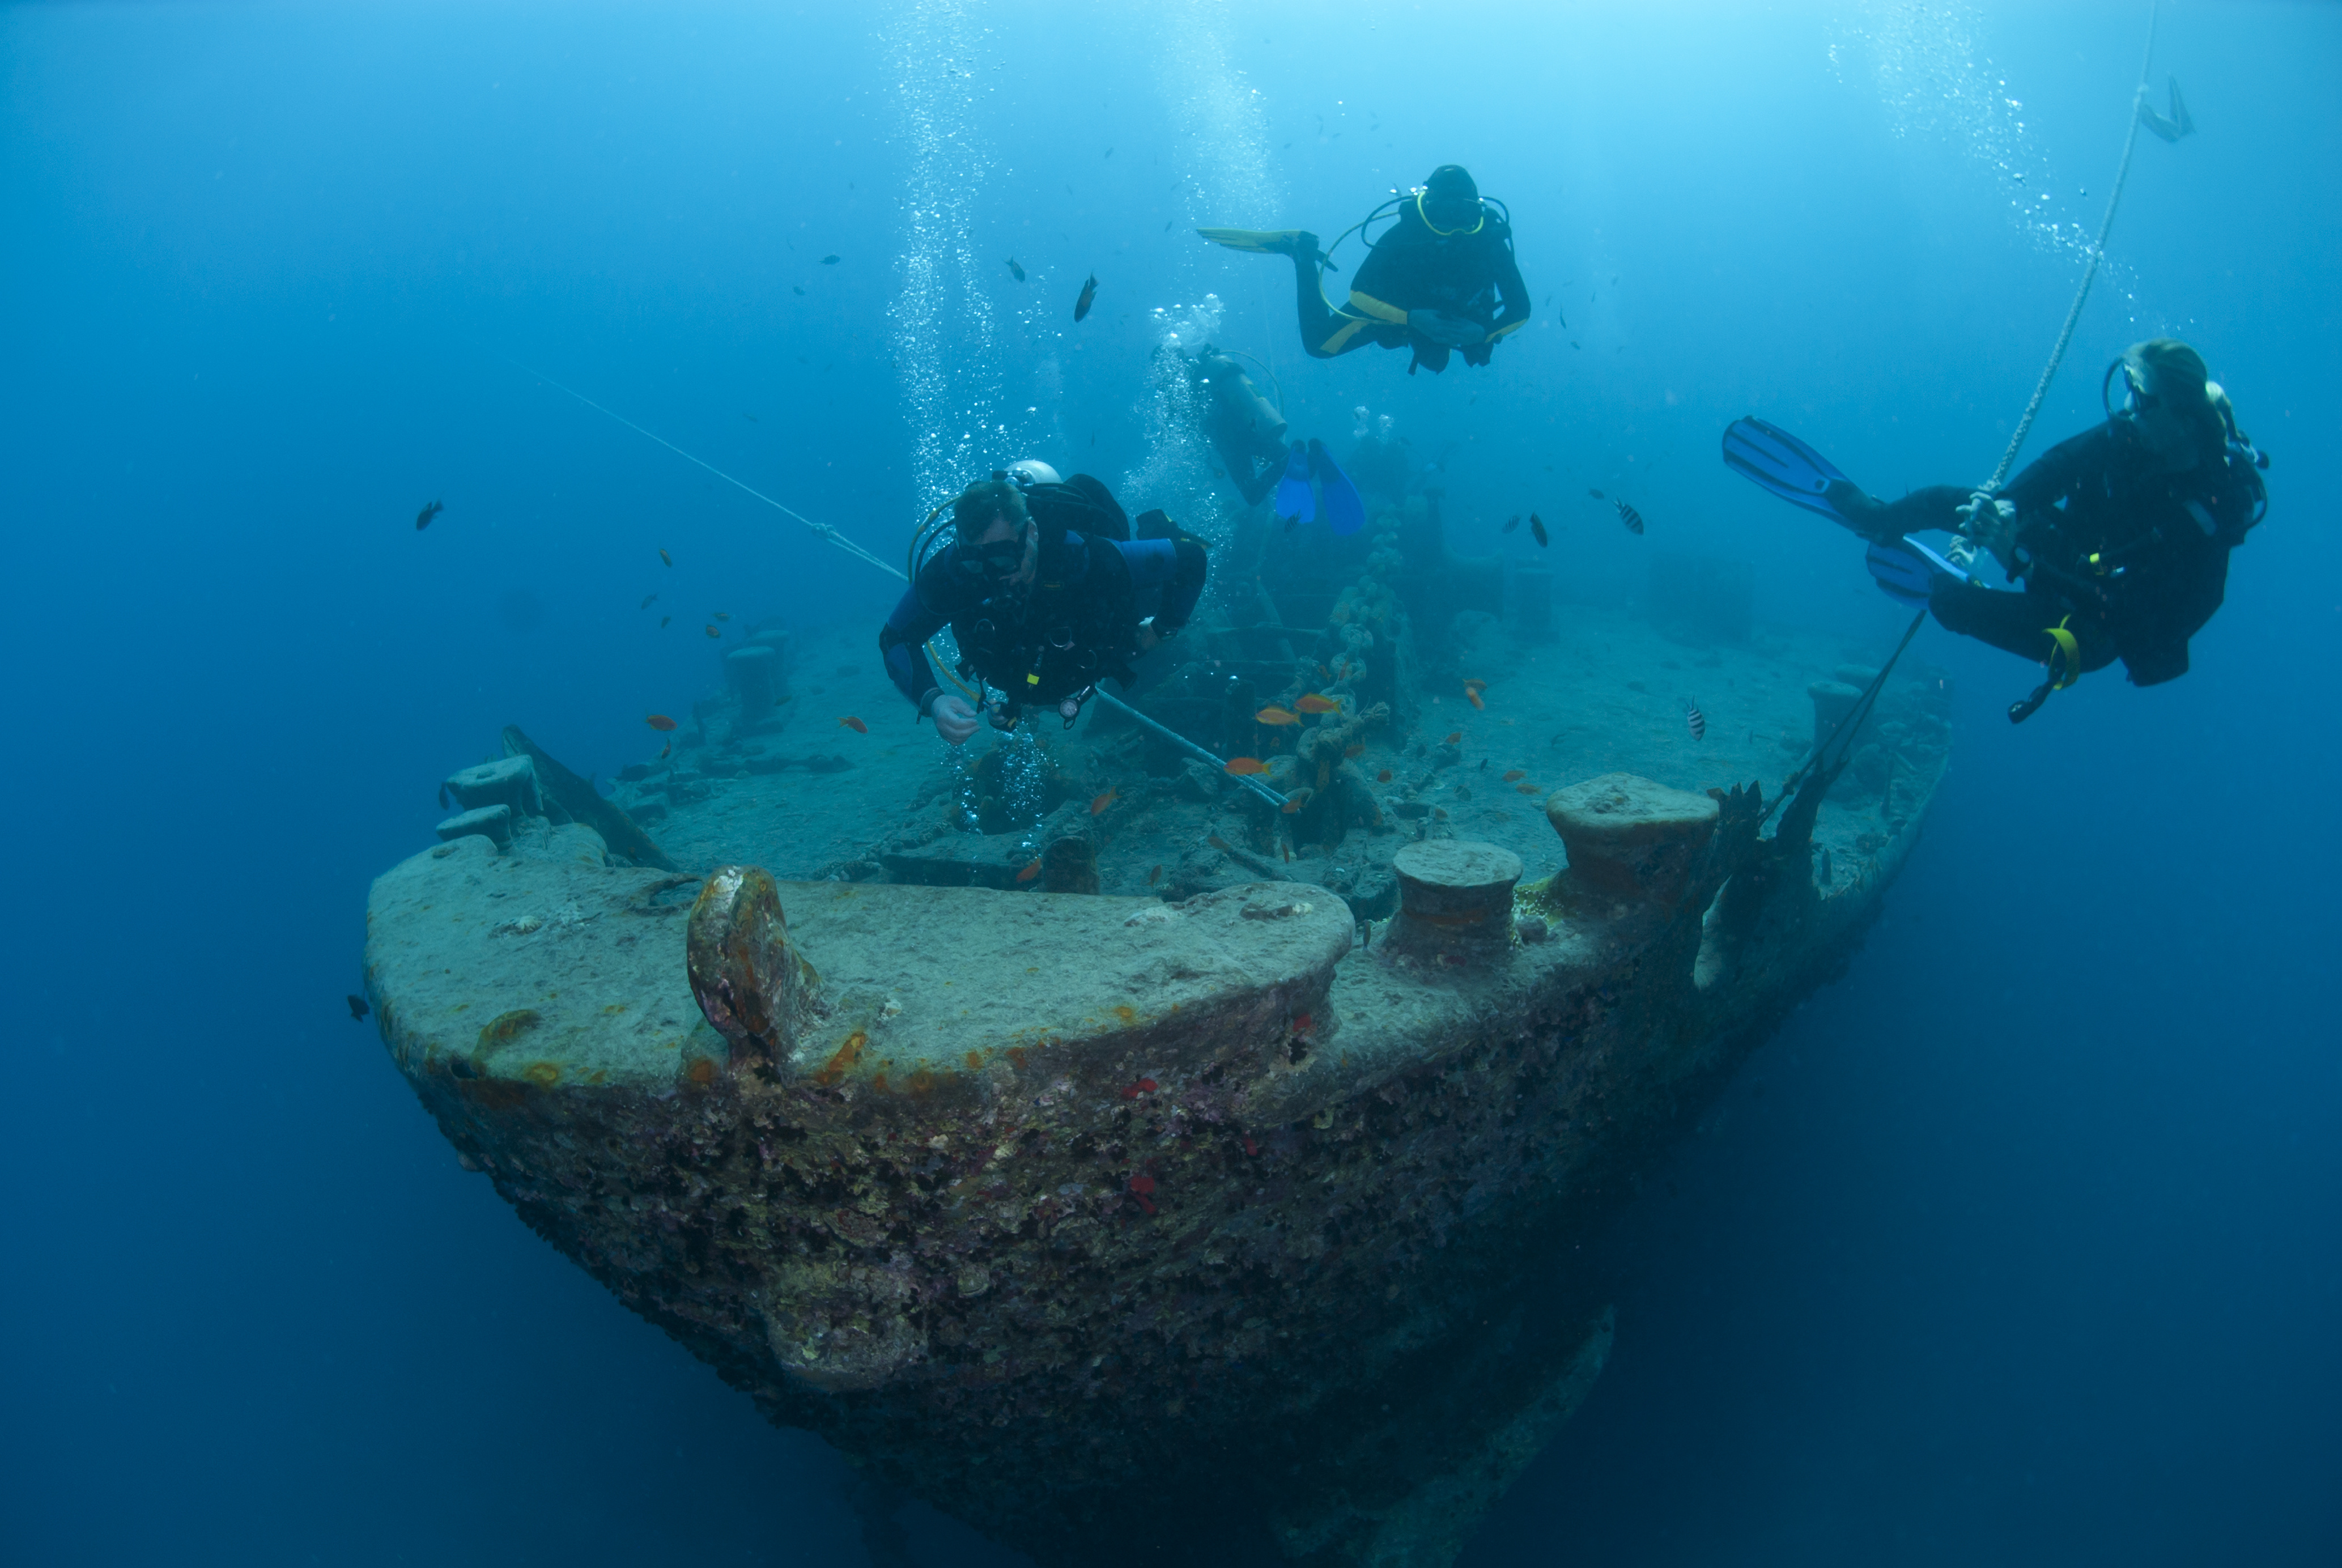 Wreck diver instructor and two students make their way back to the surface after practicing some navigation skills